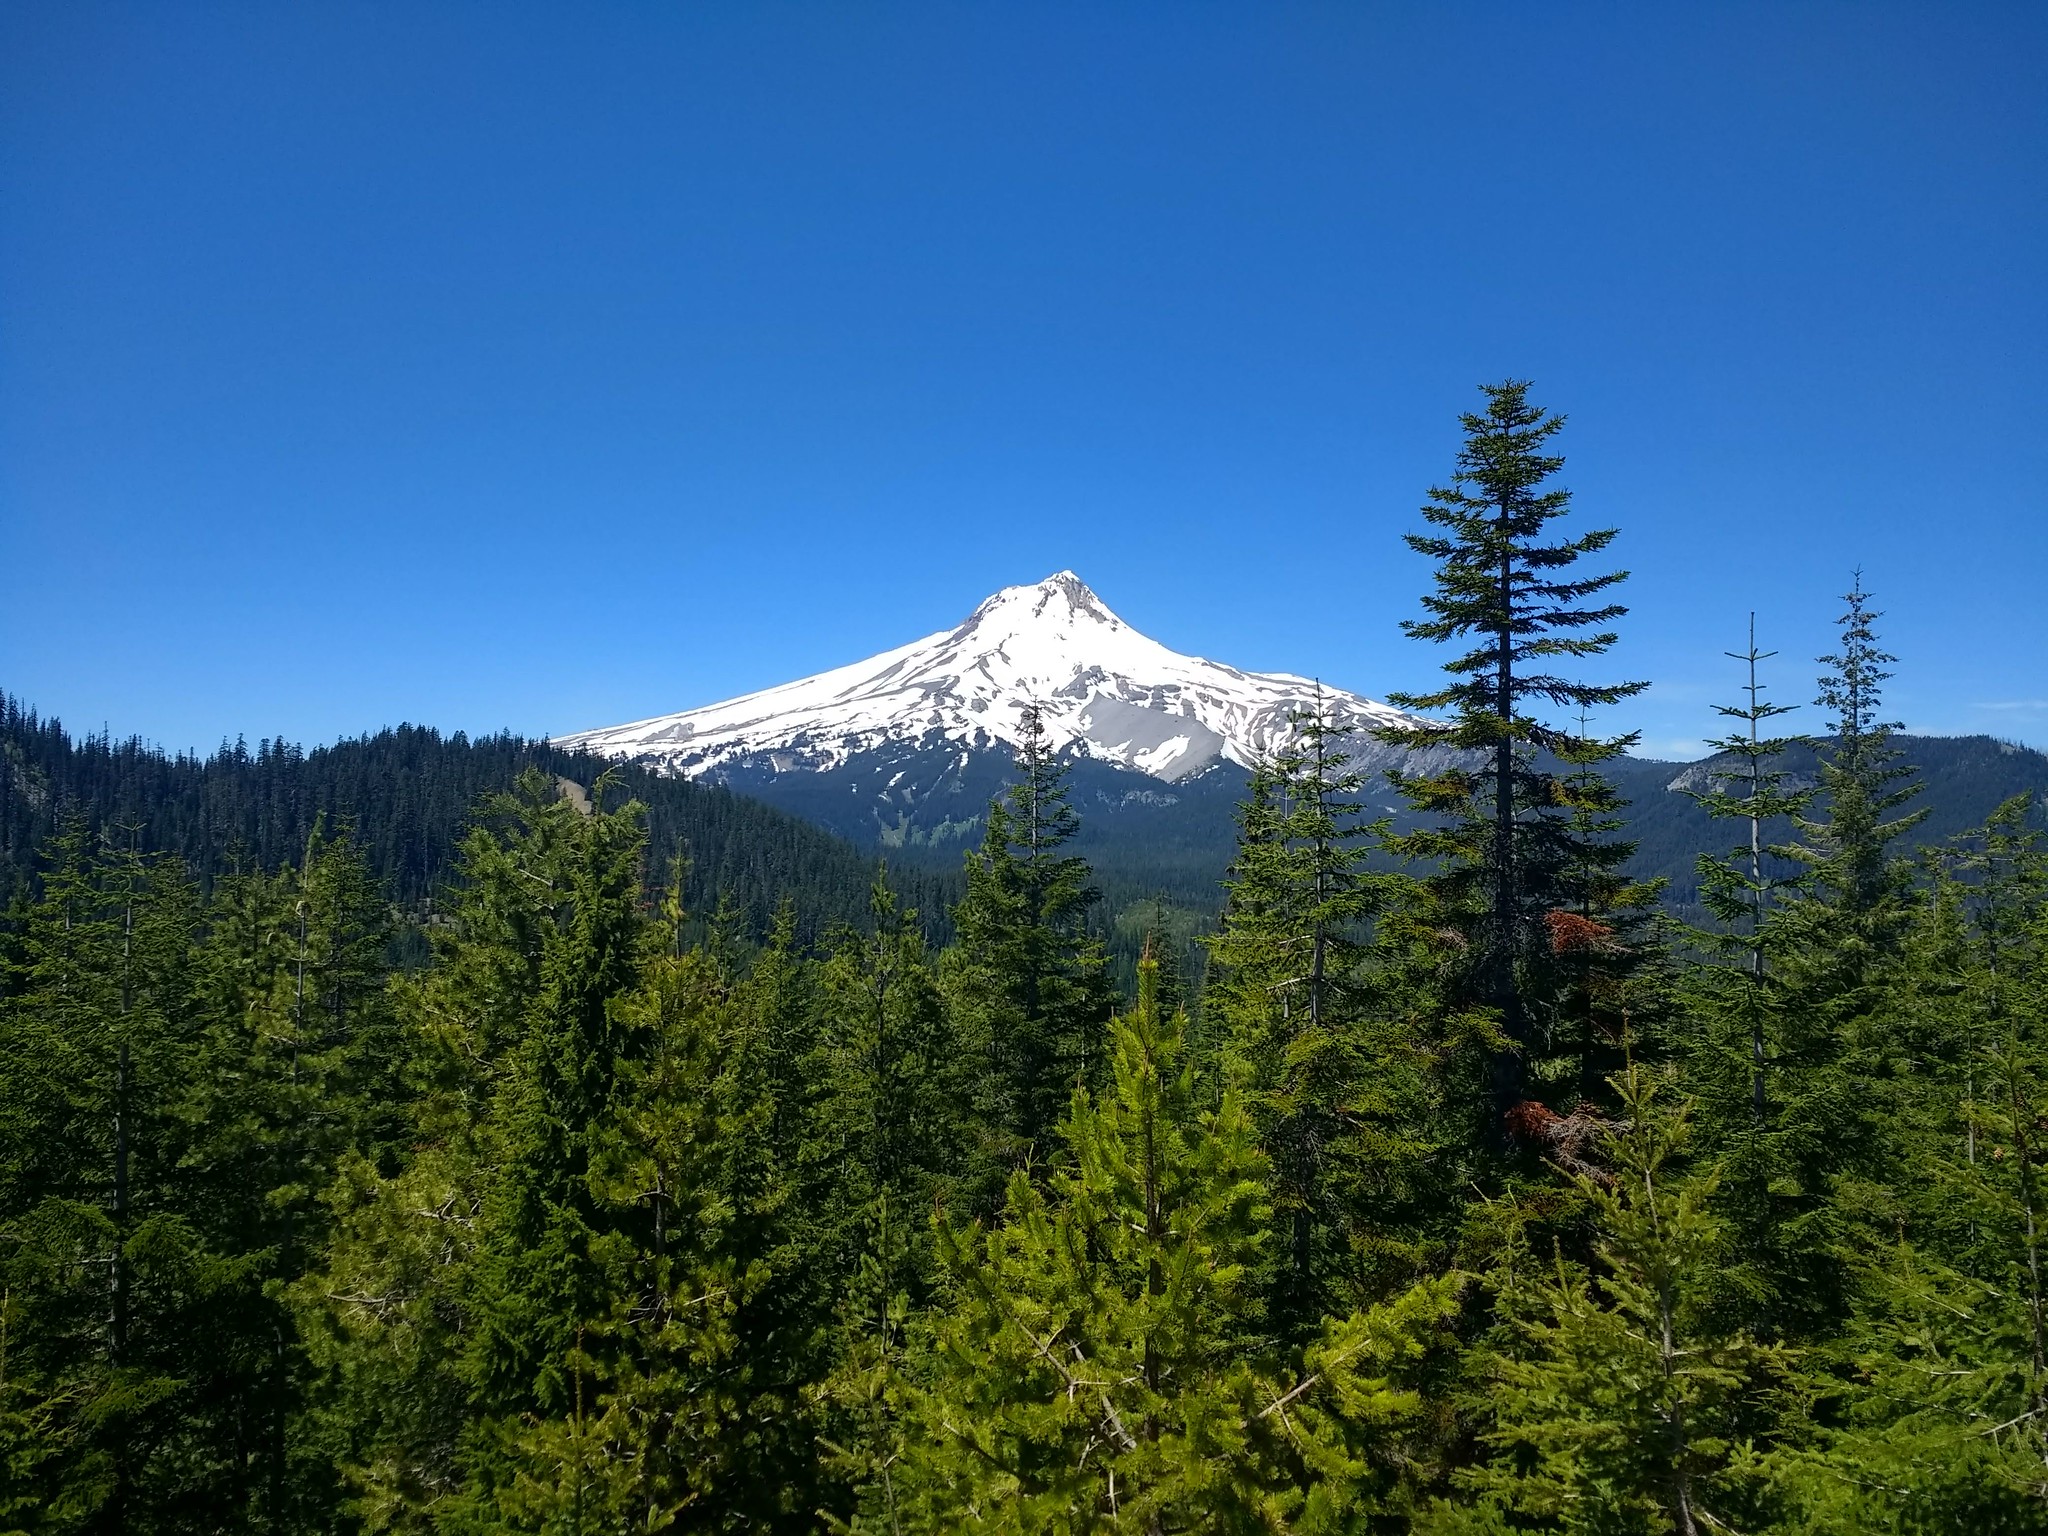 This image features Mt. Hood popping up above a horizon line of trees in Mt. Hood National Forest, all beneath a bright blue sky.